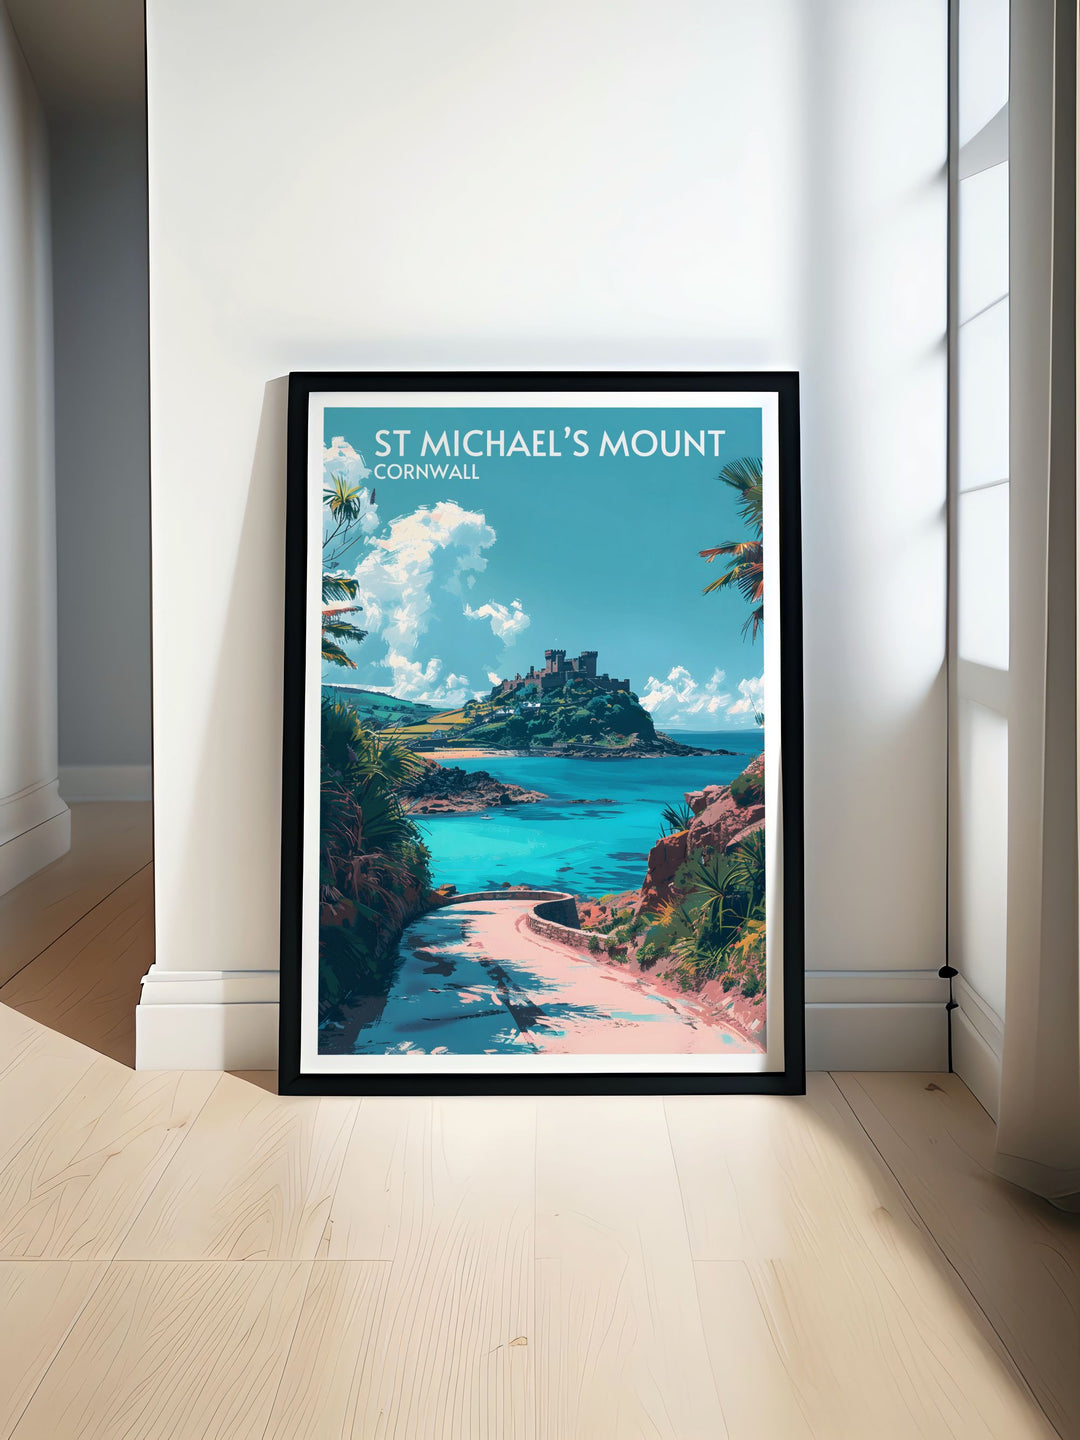 Stunning view of St Michaels Mount captured in modern wall decor with dramatic ocean backdrop showcasing the islands silhouette against the sky perfect for adding historical charm and coastal beauty to your home.